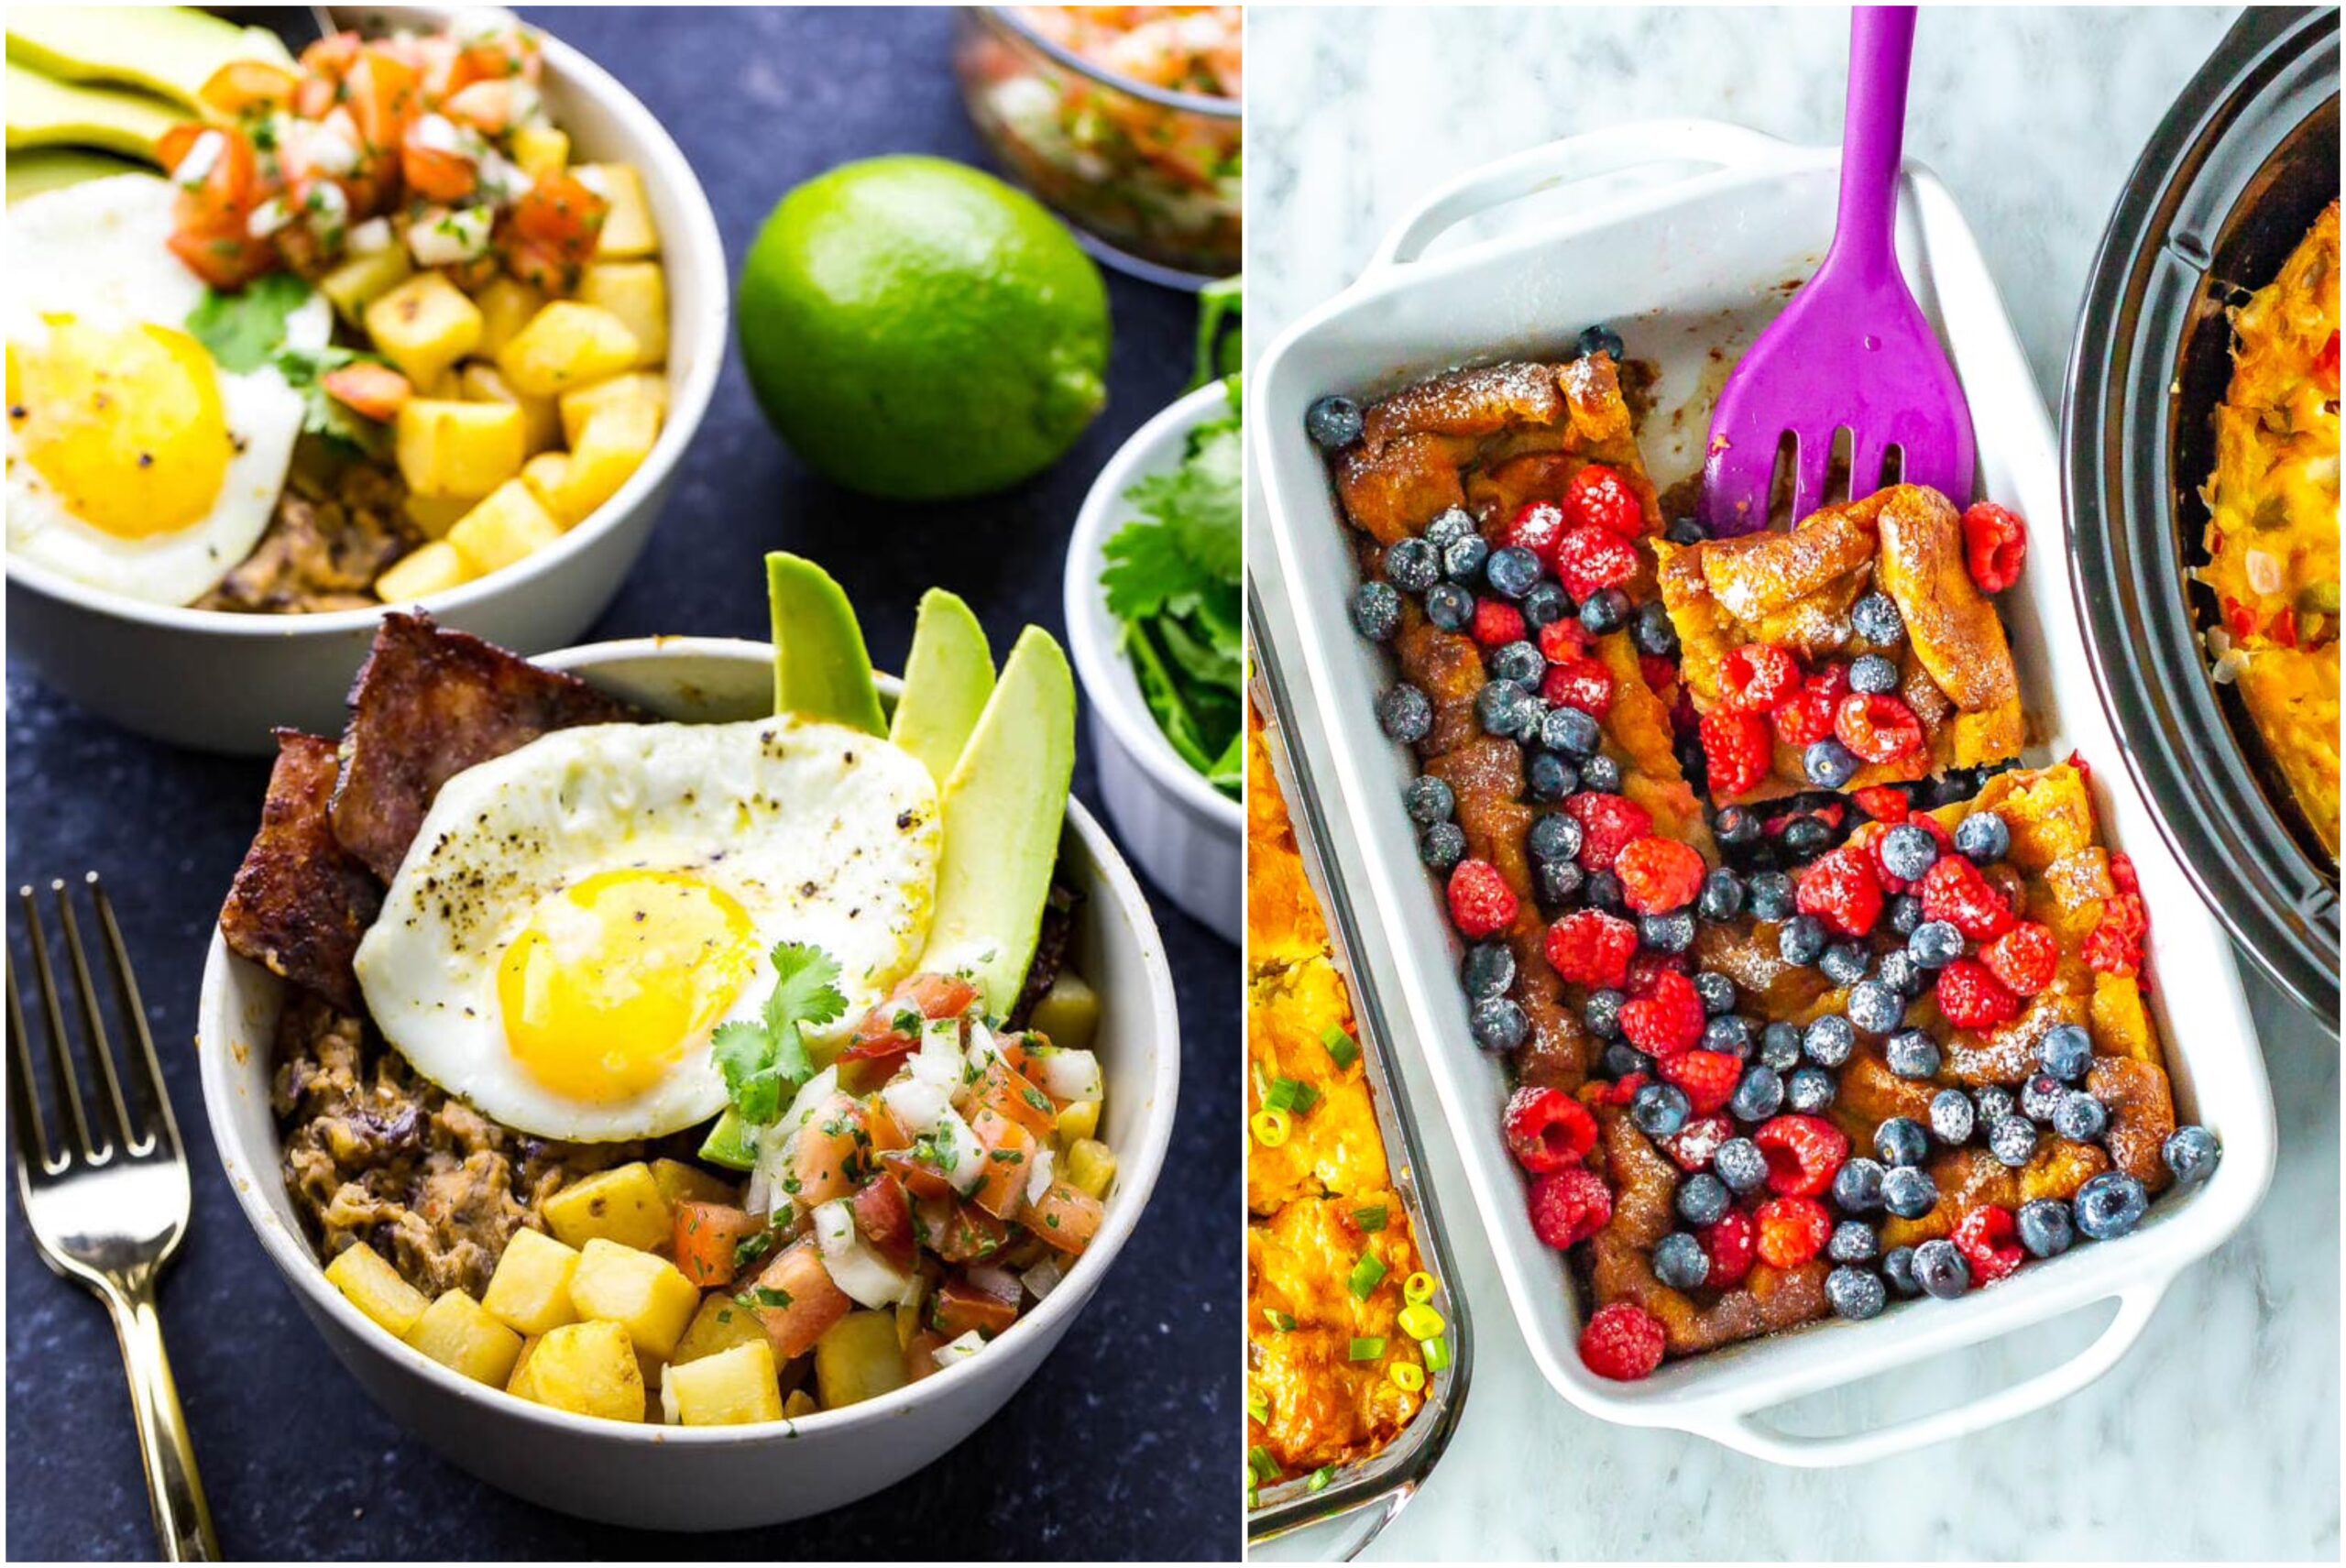 A 2 image collage. Image 1: huevos breakfast bowls and image 2 is of a french toast casserole.